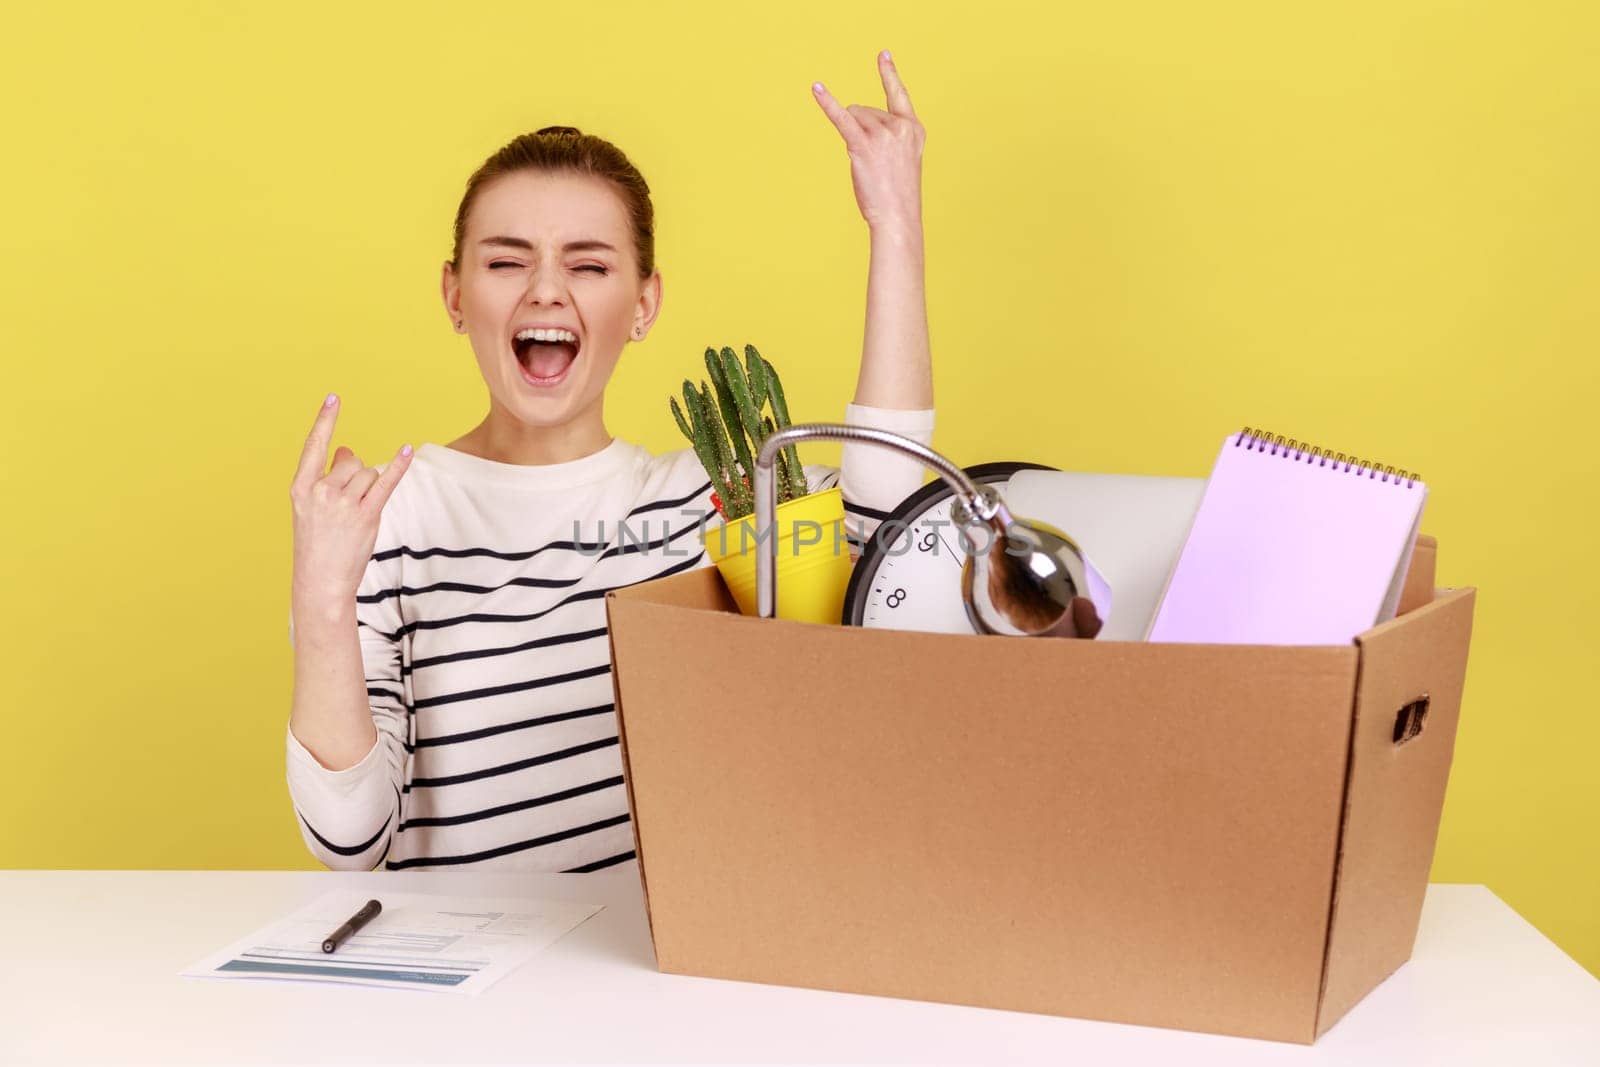 Optimistic woman office worker sitting at workplace with cardboard box with her things and yelling, showing victory sign, rejoice a new job. Indoor studio studio shot isolated on yellow background.